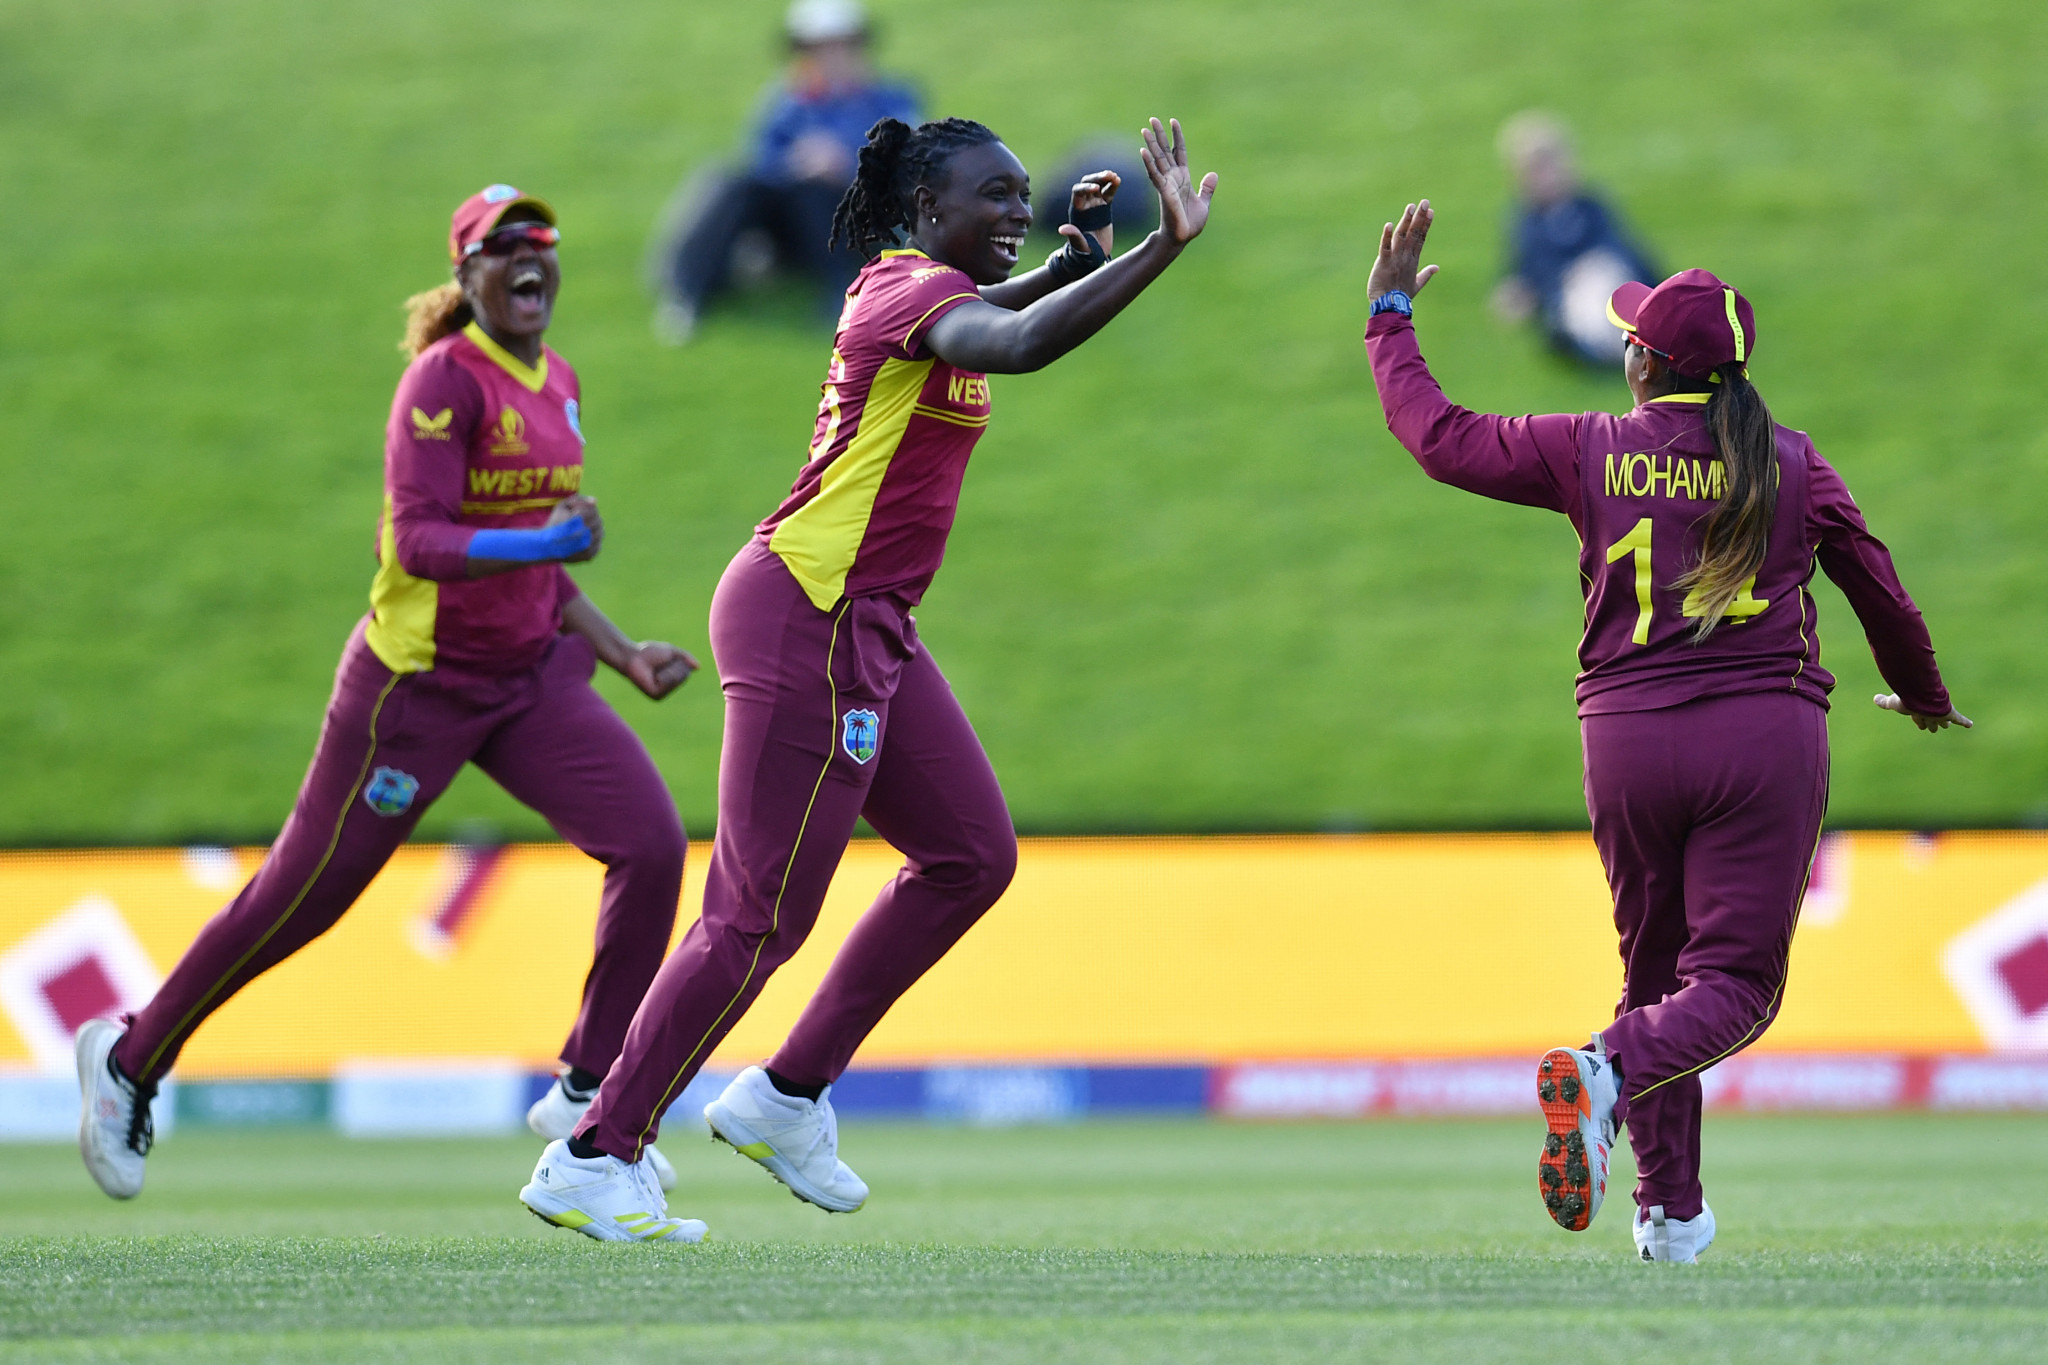 England defence of Women's Cricket World Cup hanging in balance after West Indies defeat